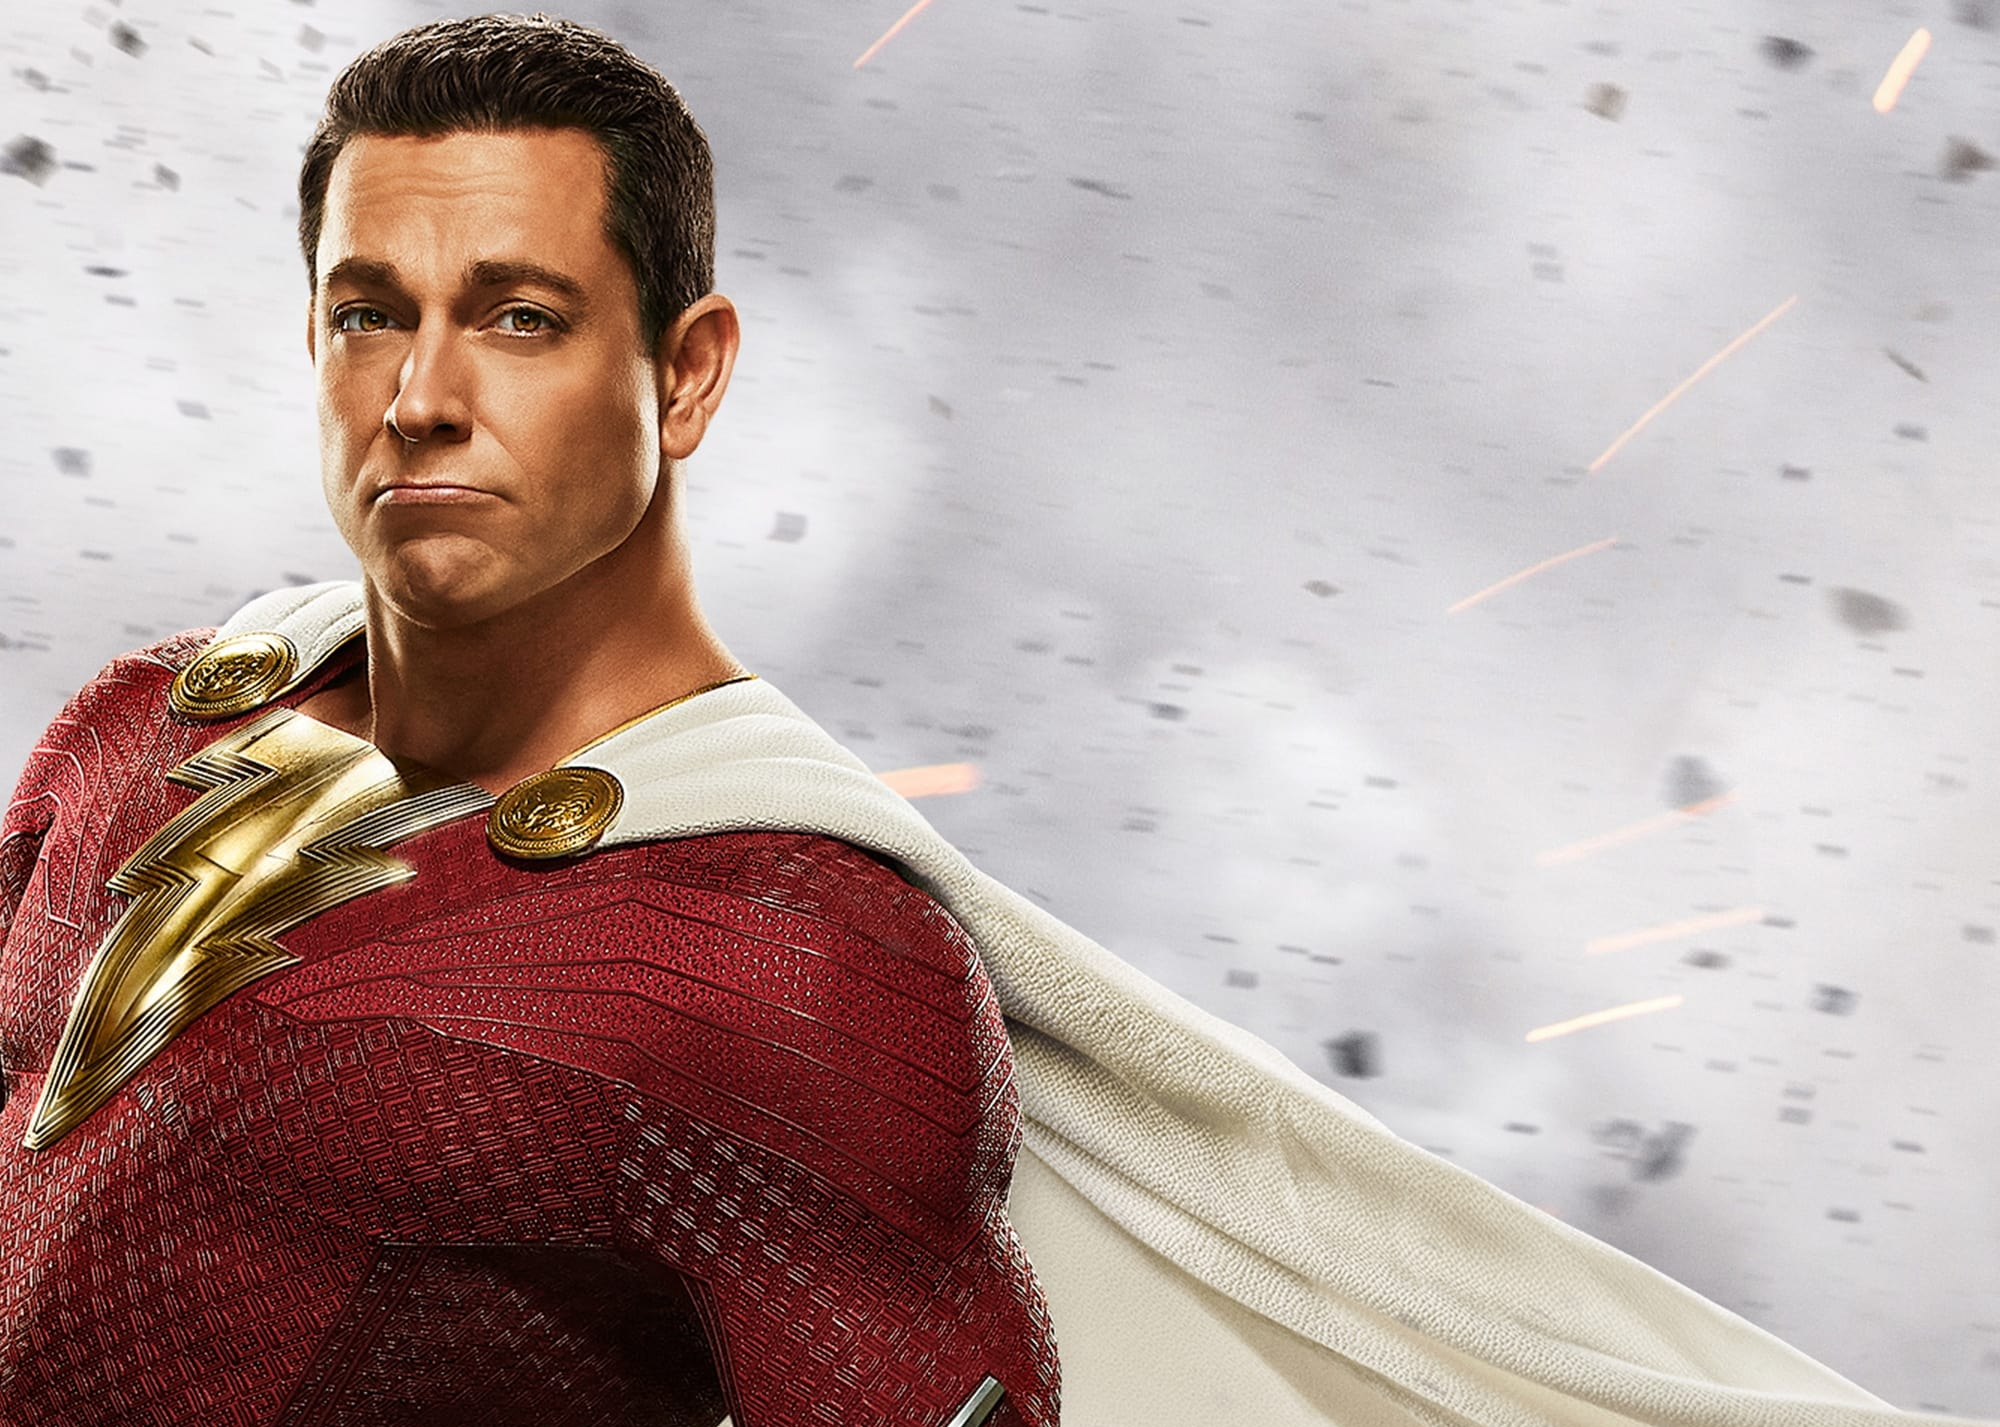 A new trailer for 'Shazam! Fury of the Gods' is coming tomorrow